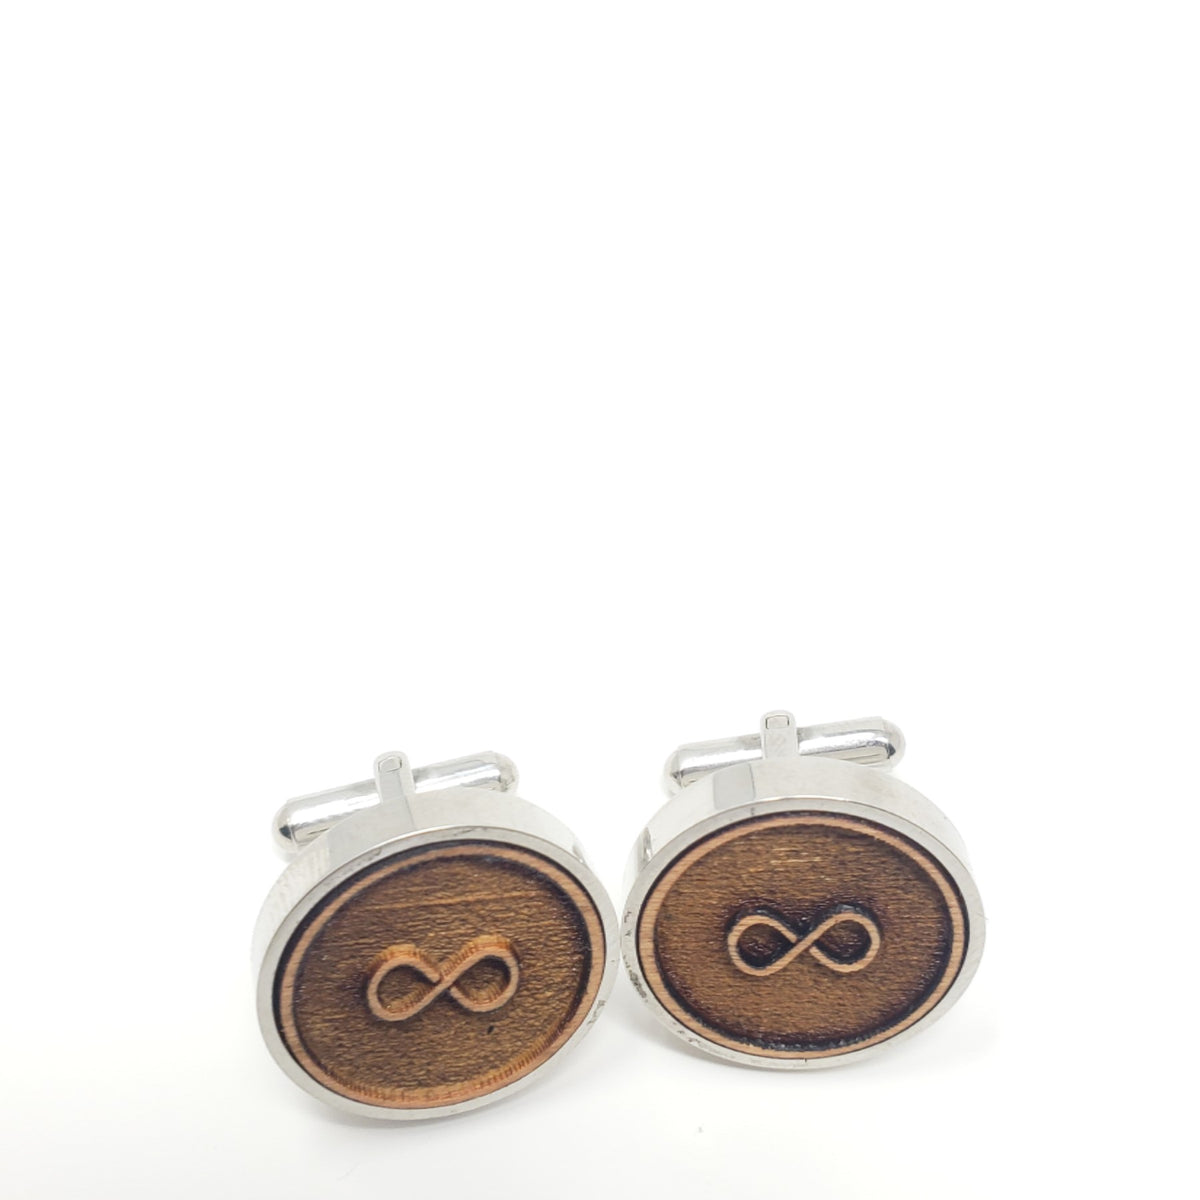 Infinity Symbol Stainless and Wood Cufflinks